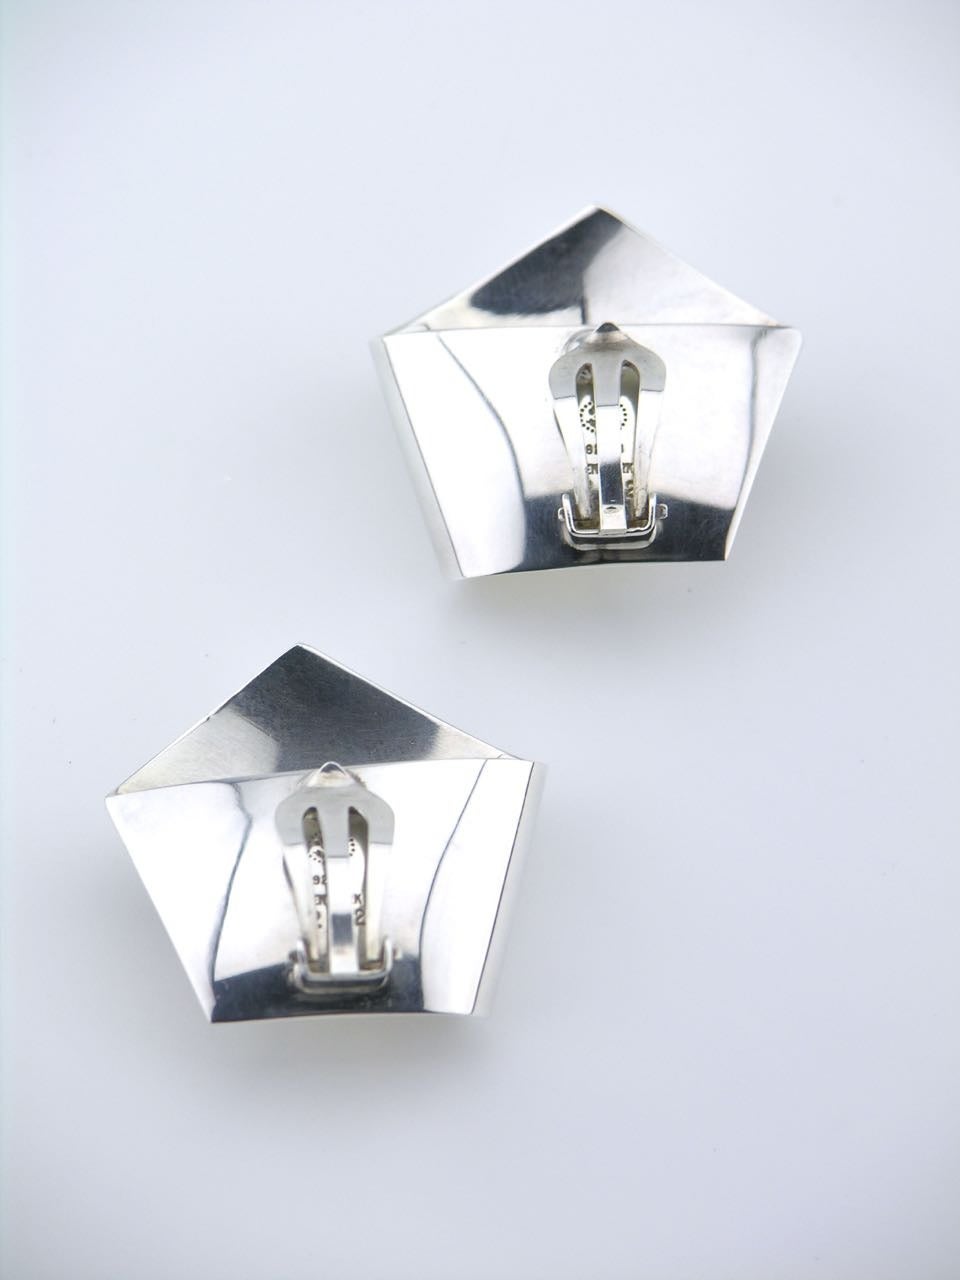 A pair of solid silver folded pentagon shape clip earrings by Georg Jensen - each earring consisting of a loosely folded ribbon that forms a pentagon shape with a clip back fitting 

- marked with post 1945 marks for Georg Jensen of Copenhagen and